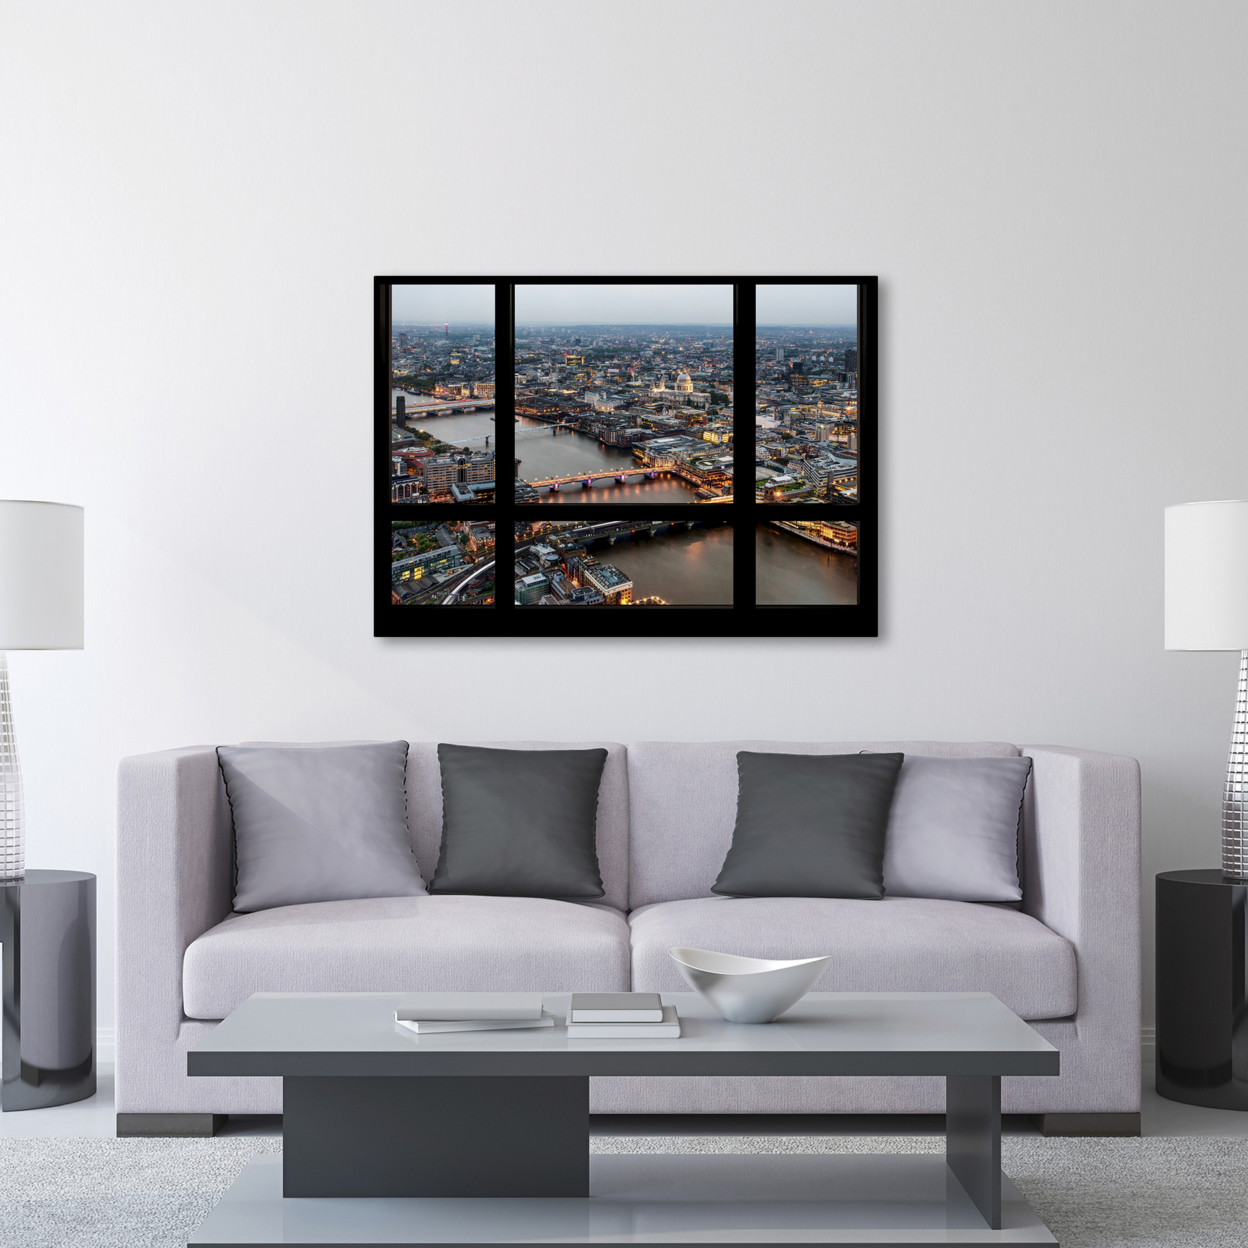 Philippe Hugonnard 'Window View London At Dusk 2' Canvas Wall Art 35 X 47 Inches